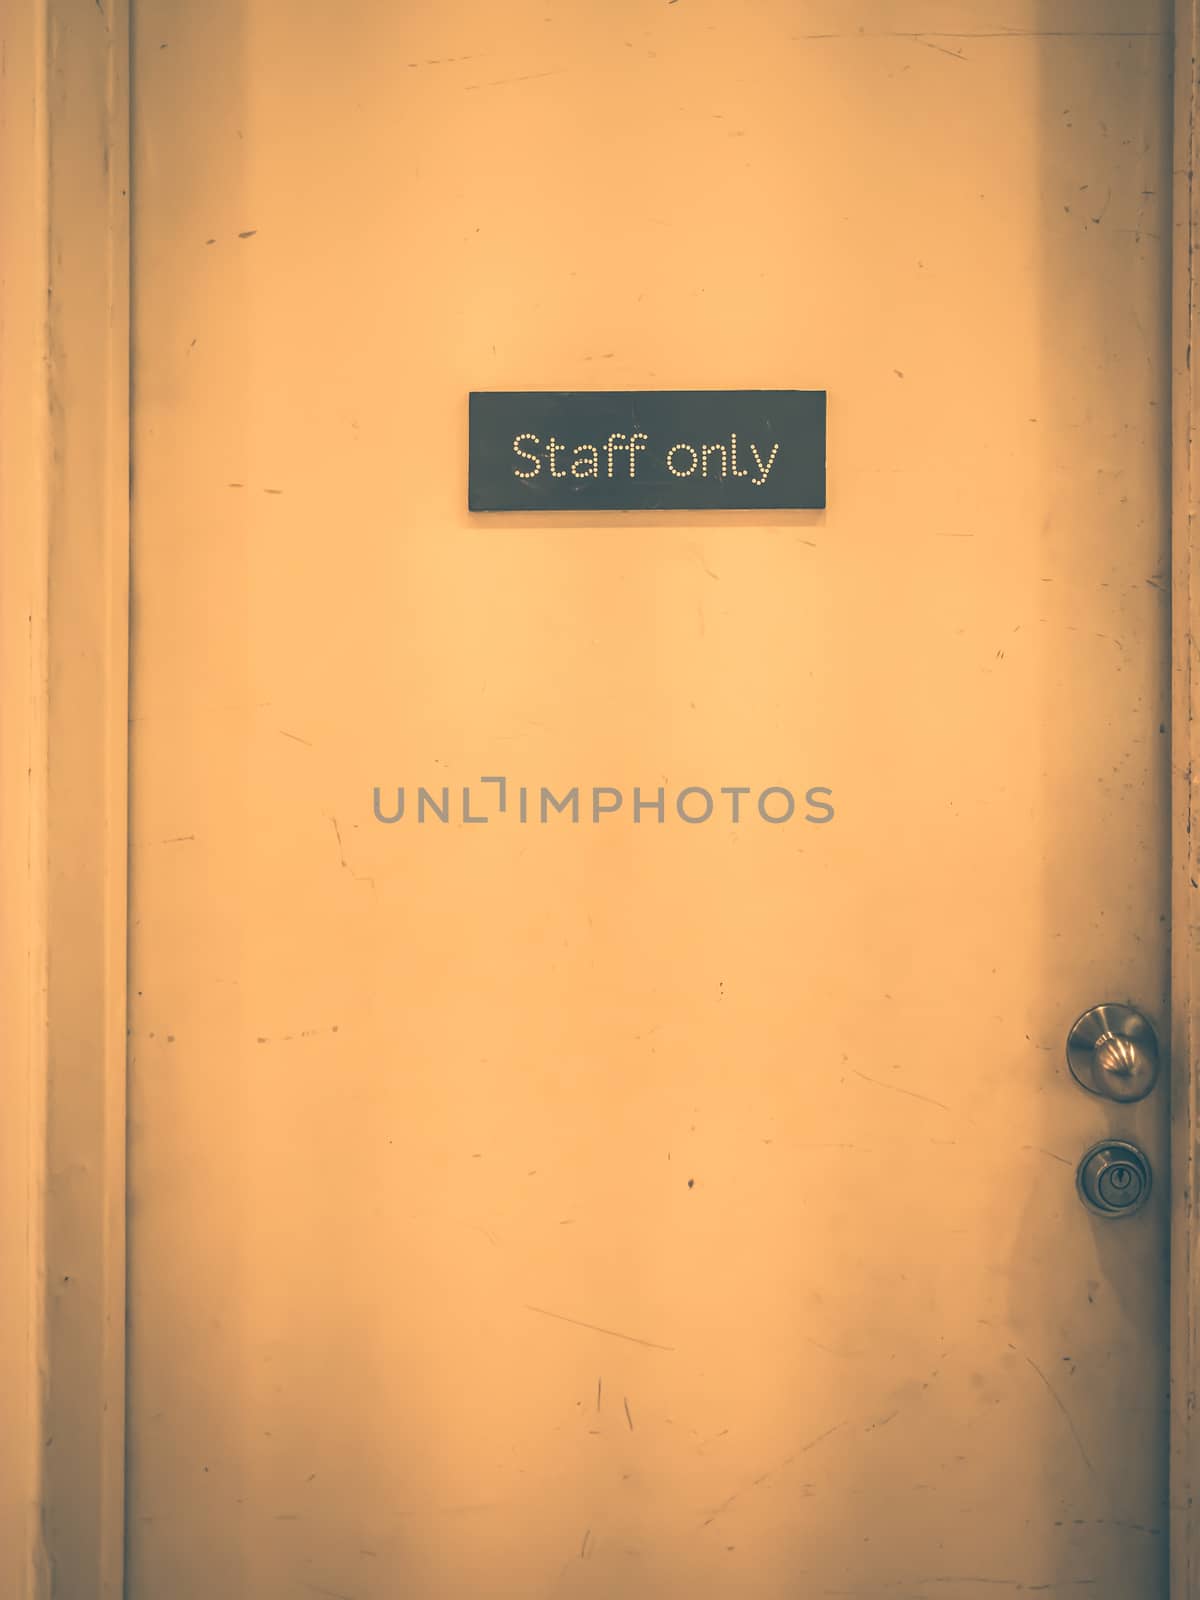 Staff only sign on a old door. Vintage tone by ronnarong